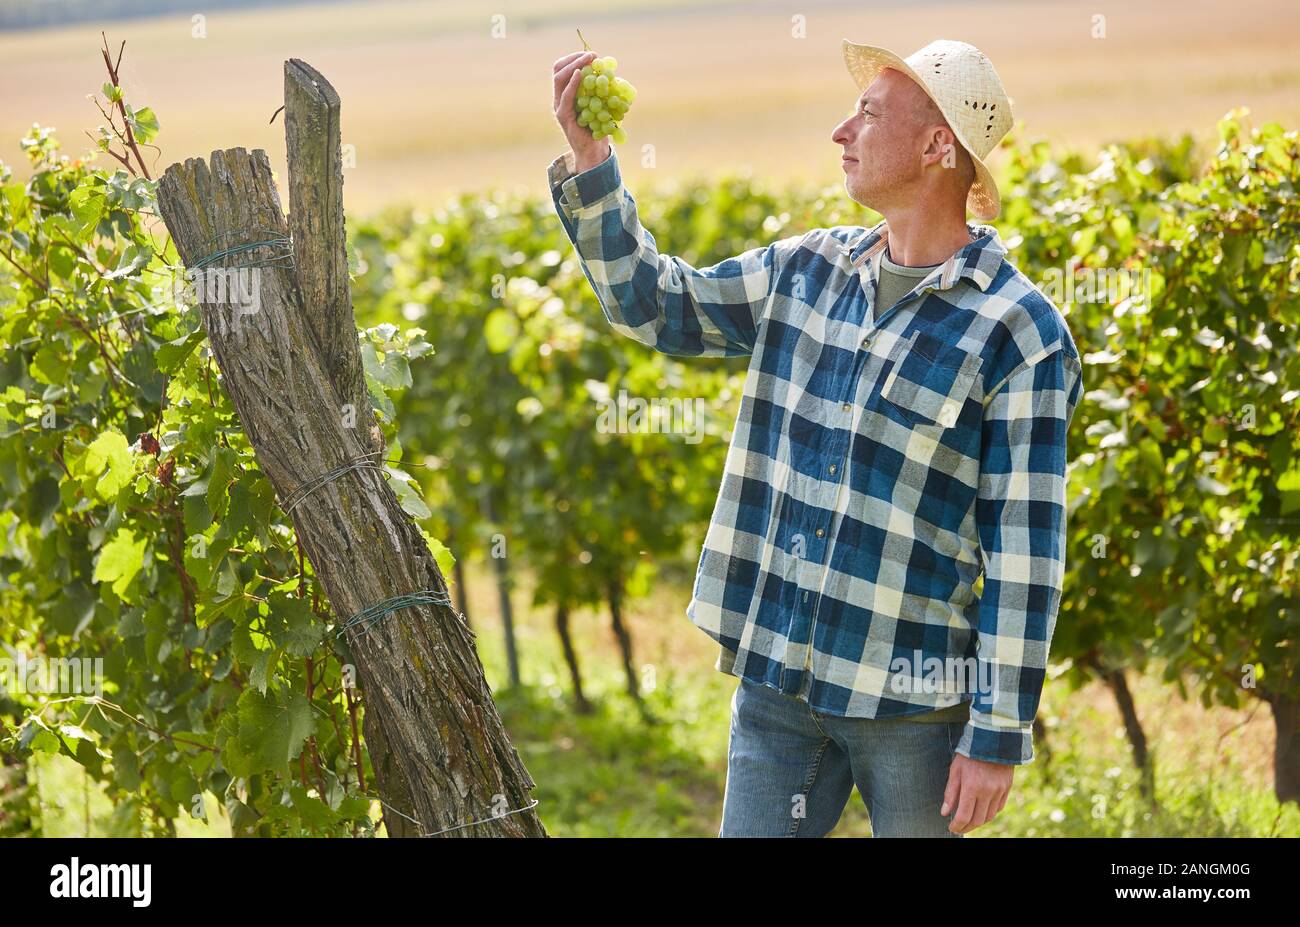 Winegrowers in the vineyard with a vine of grapes at the autumn harvest Stock Photo